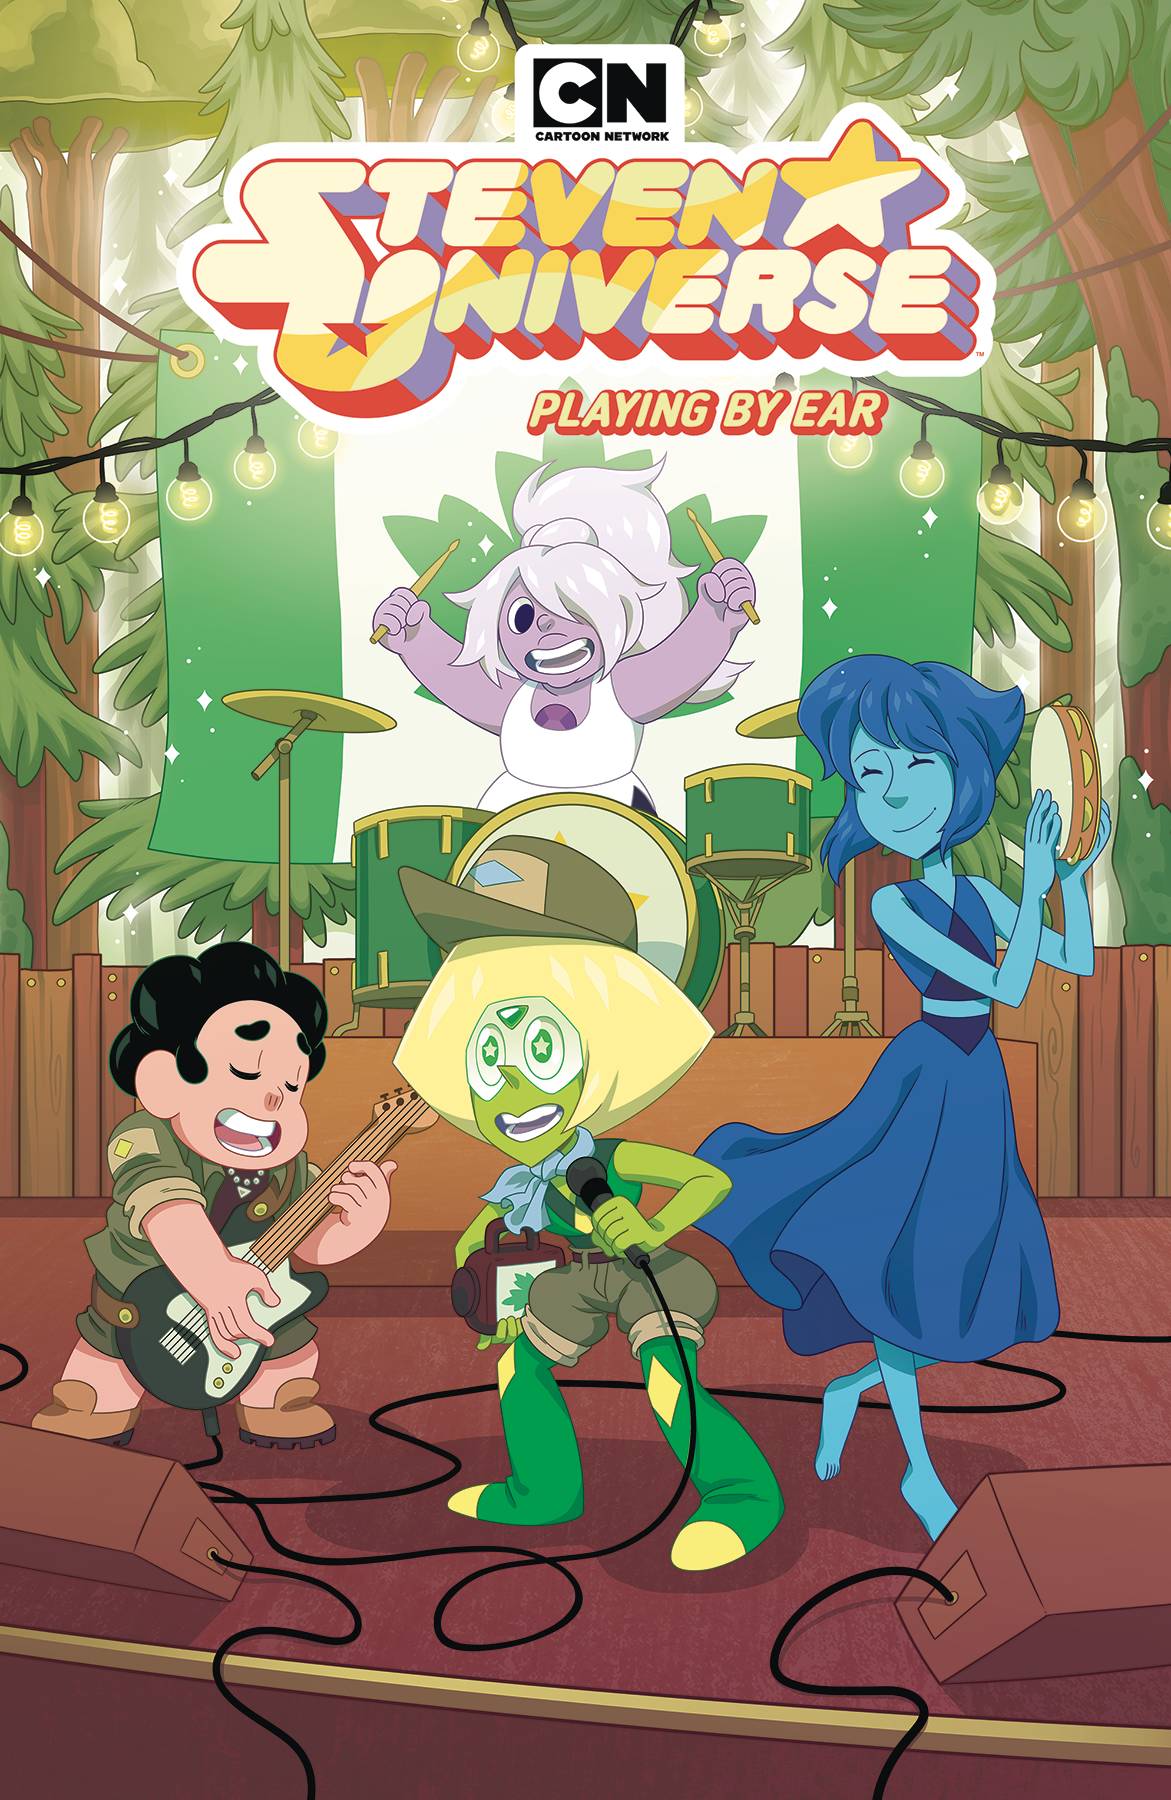 Steven Universe Ongoing Graphic Novel Volume 6 Playing by Ear